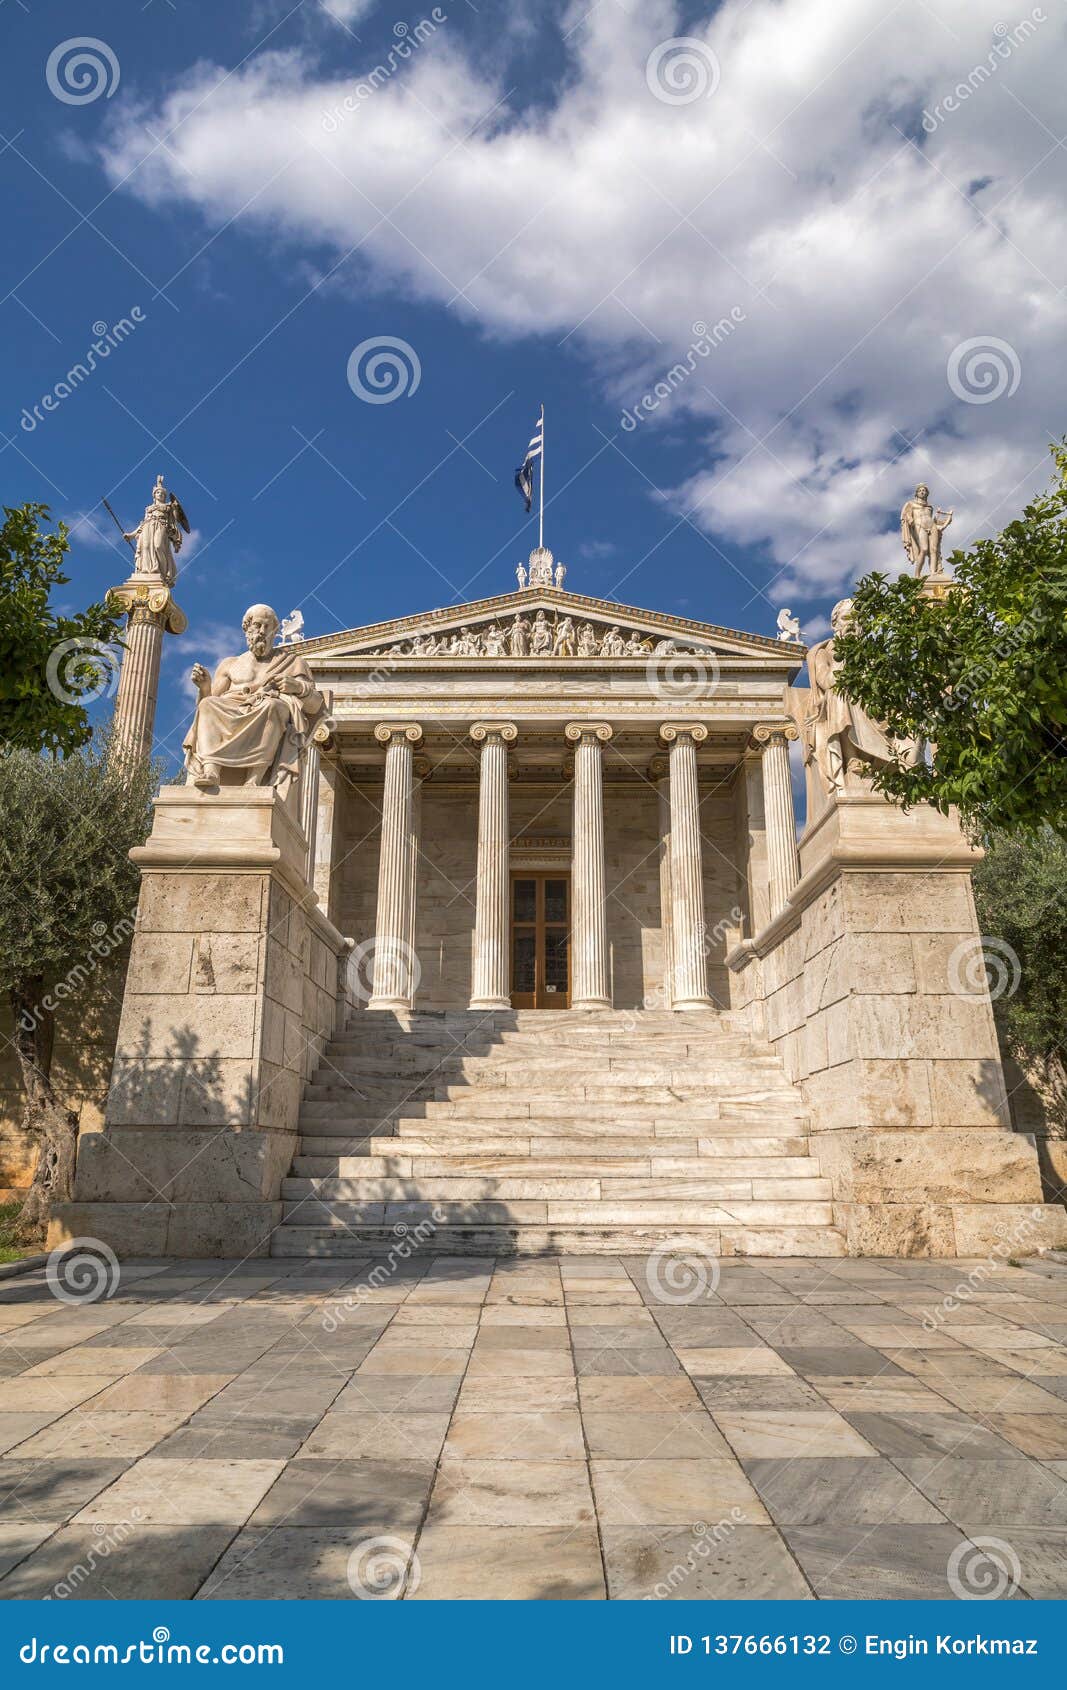 Exterior View Of The Academy Of Athens, Greece Stock Photo - Image of ...